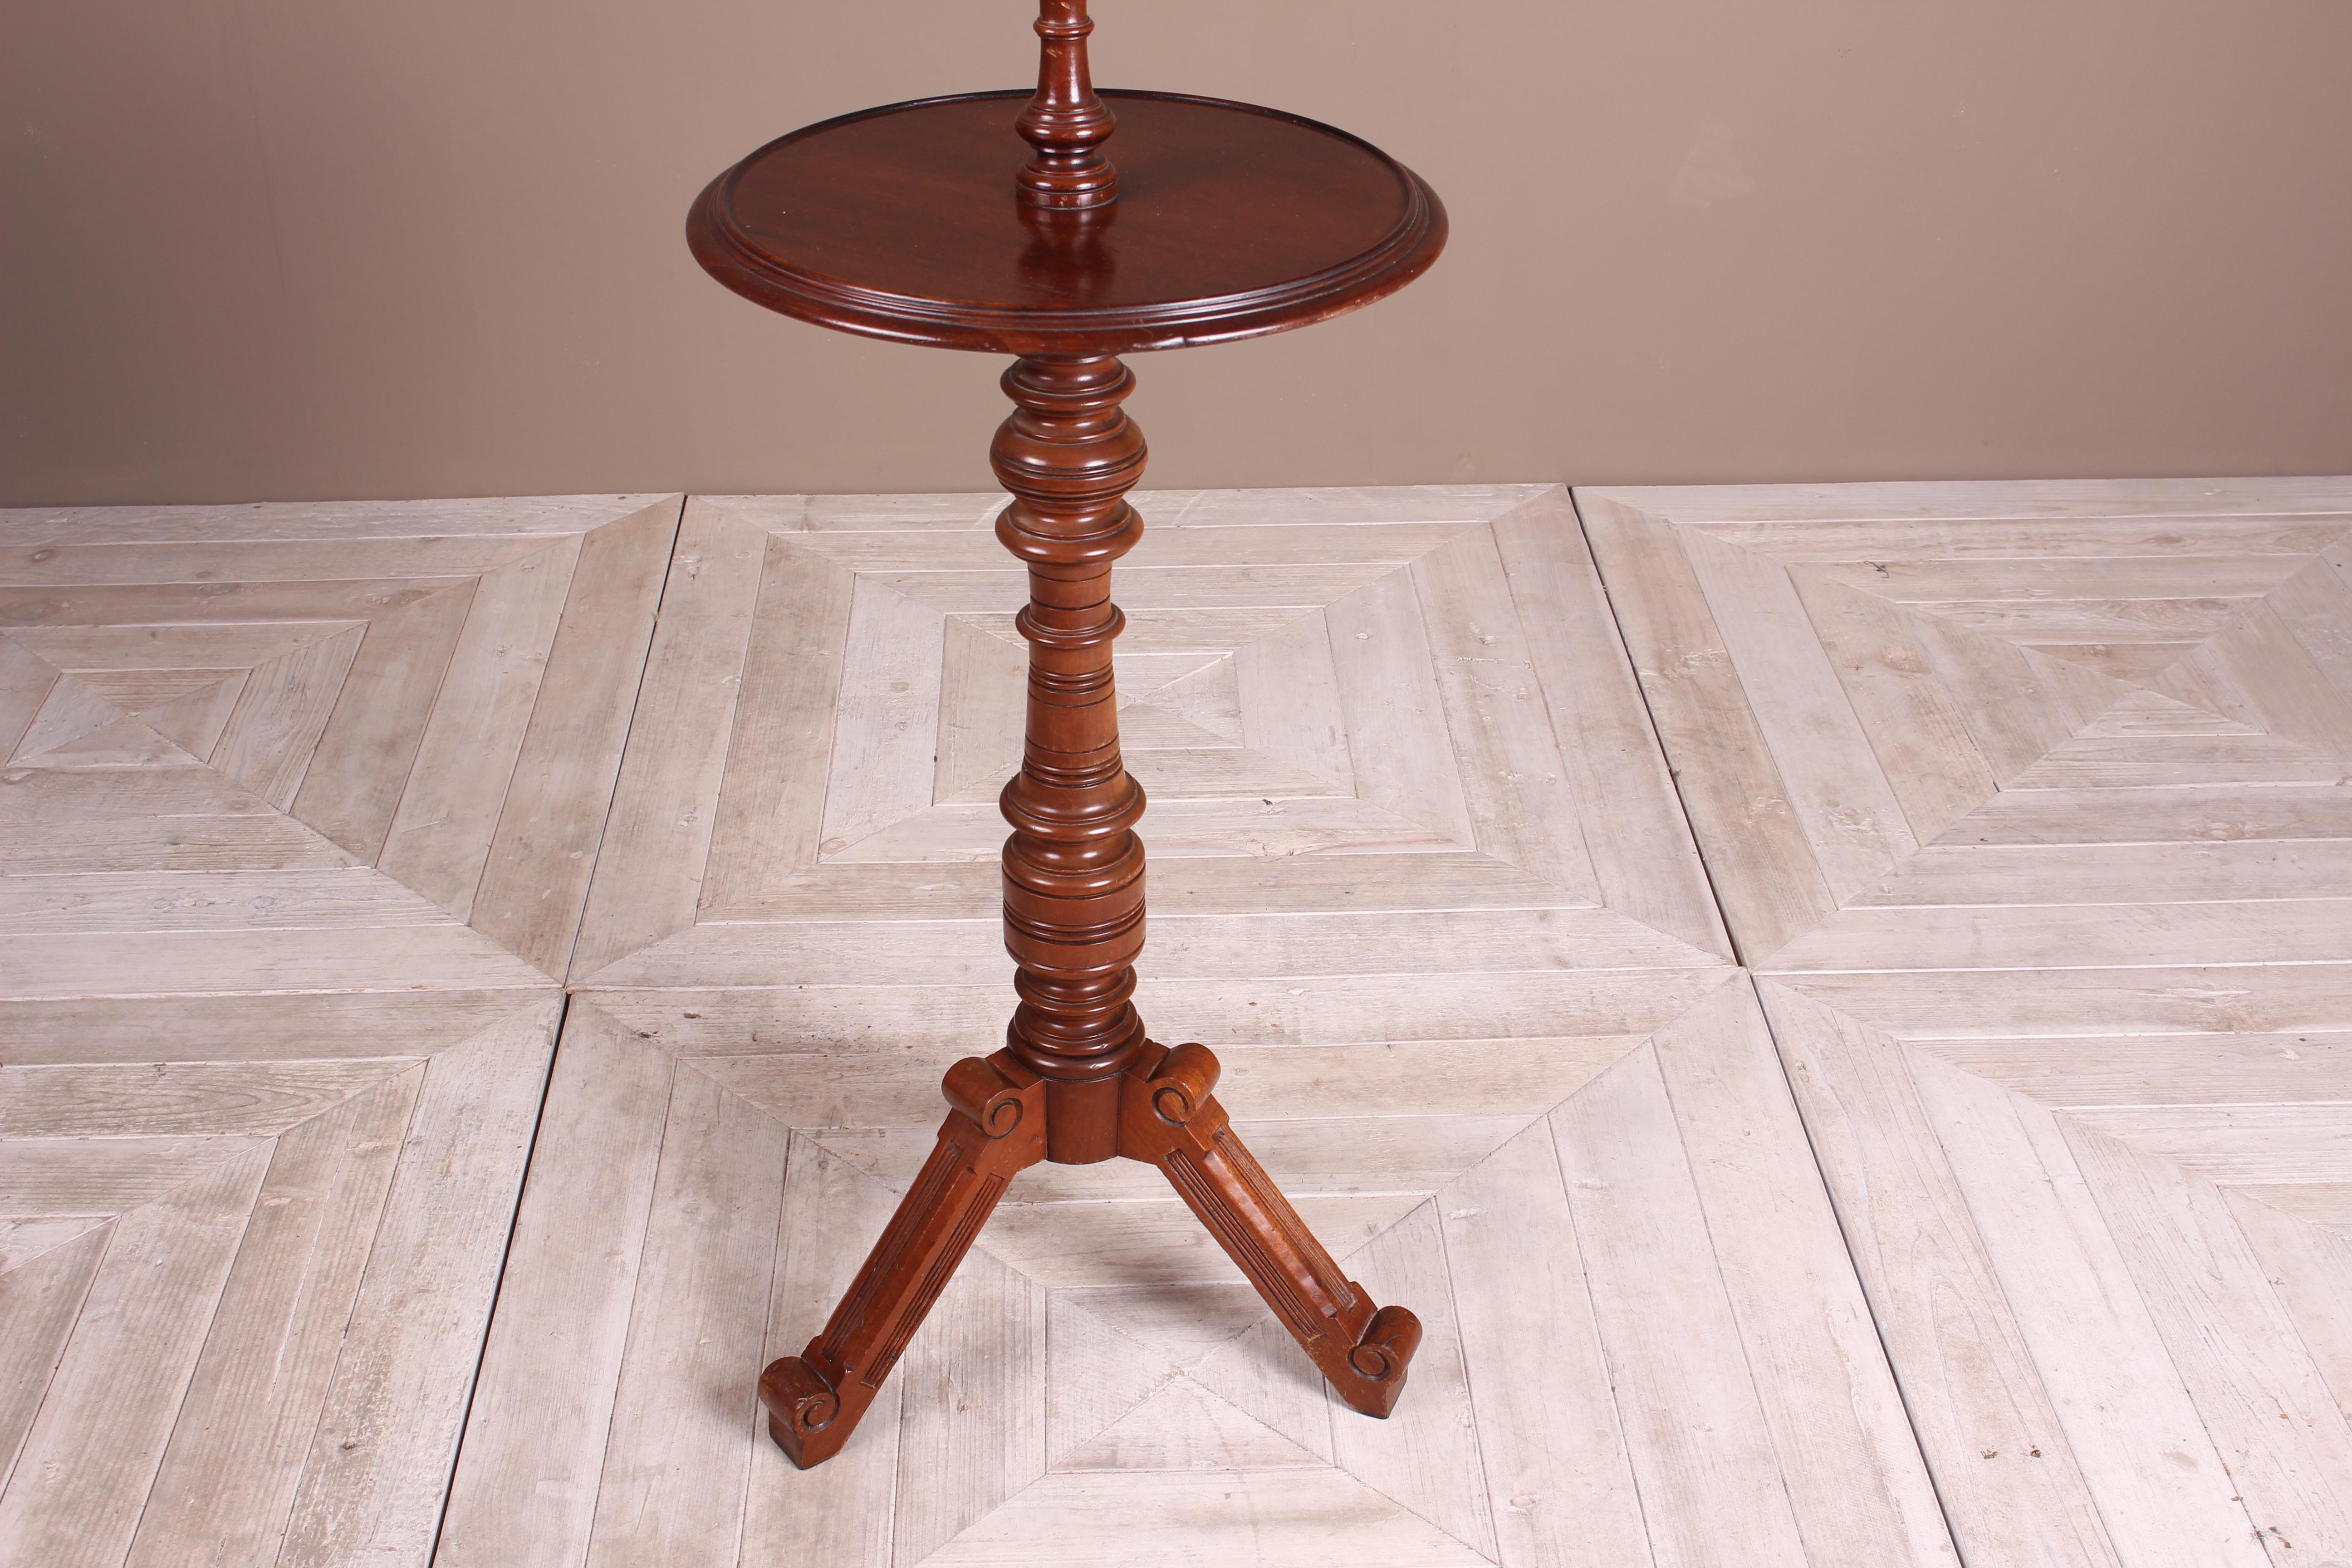 A lovely Victorian mahogany shaving stand, circa 1880. Having an adjustable beveled edge mirror which is nicely framed with the lipped edge standing above the circular stand with a reeded edge. The telescopic brass upright with two adjustable